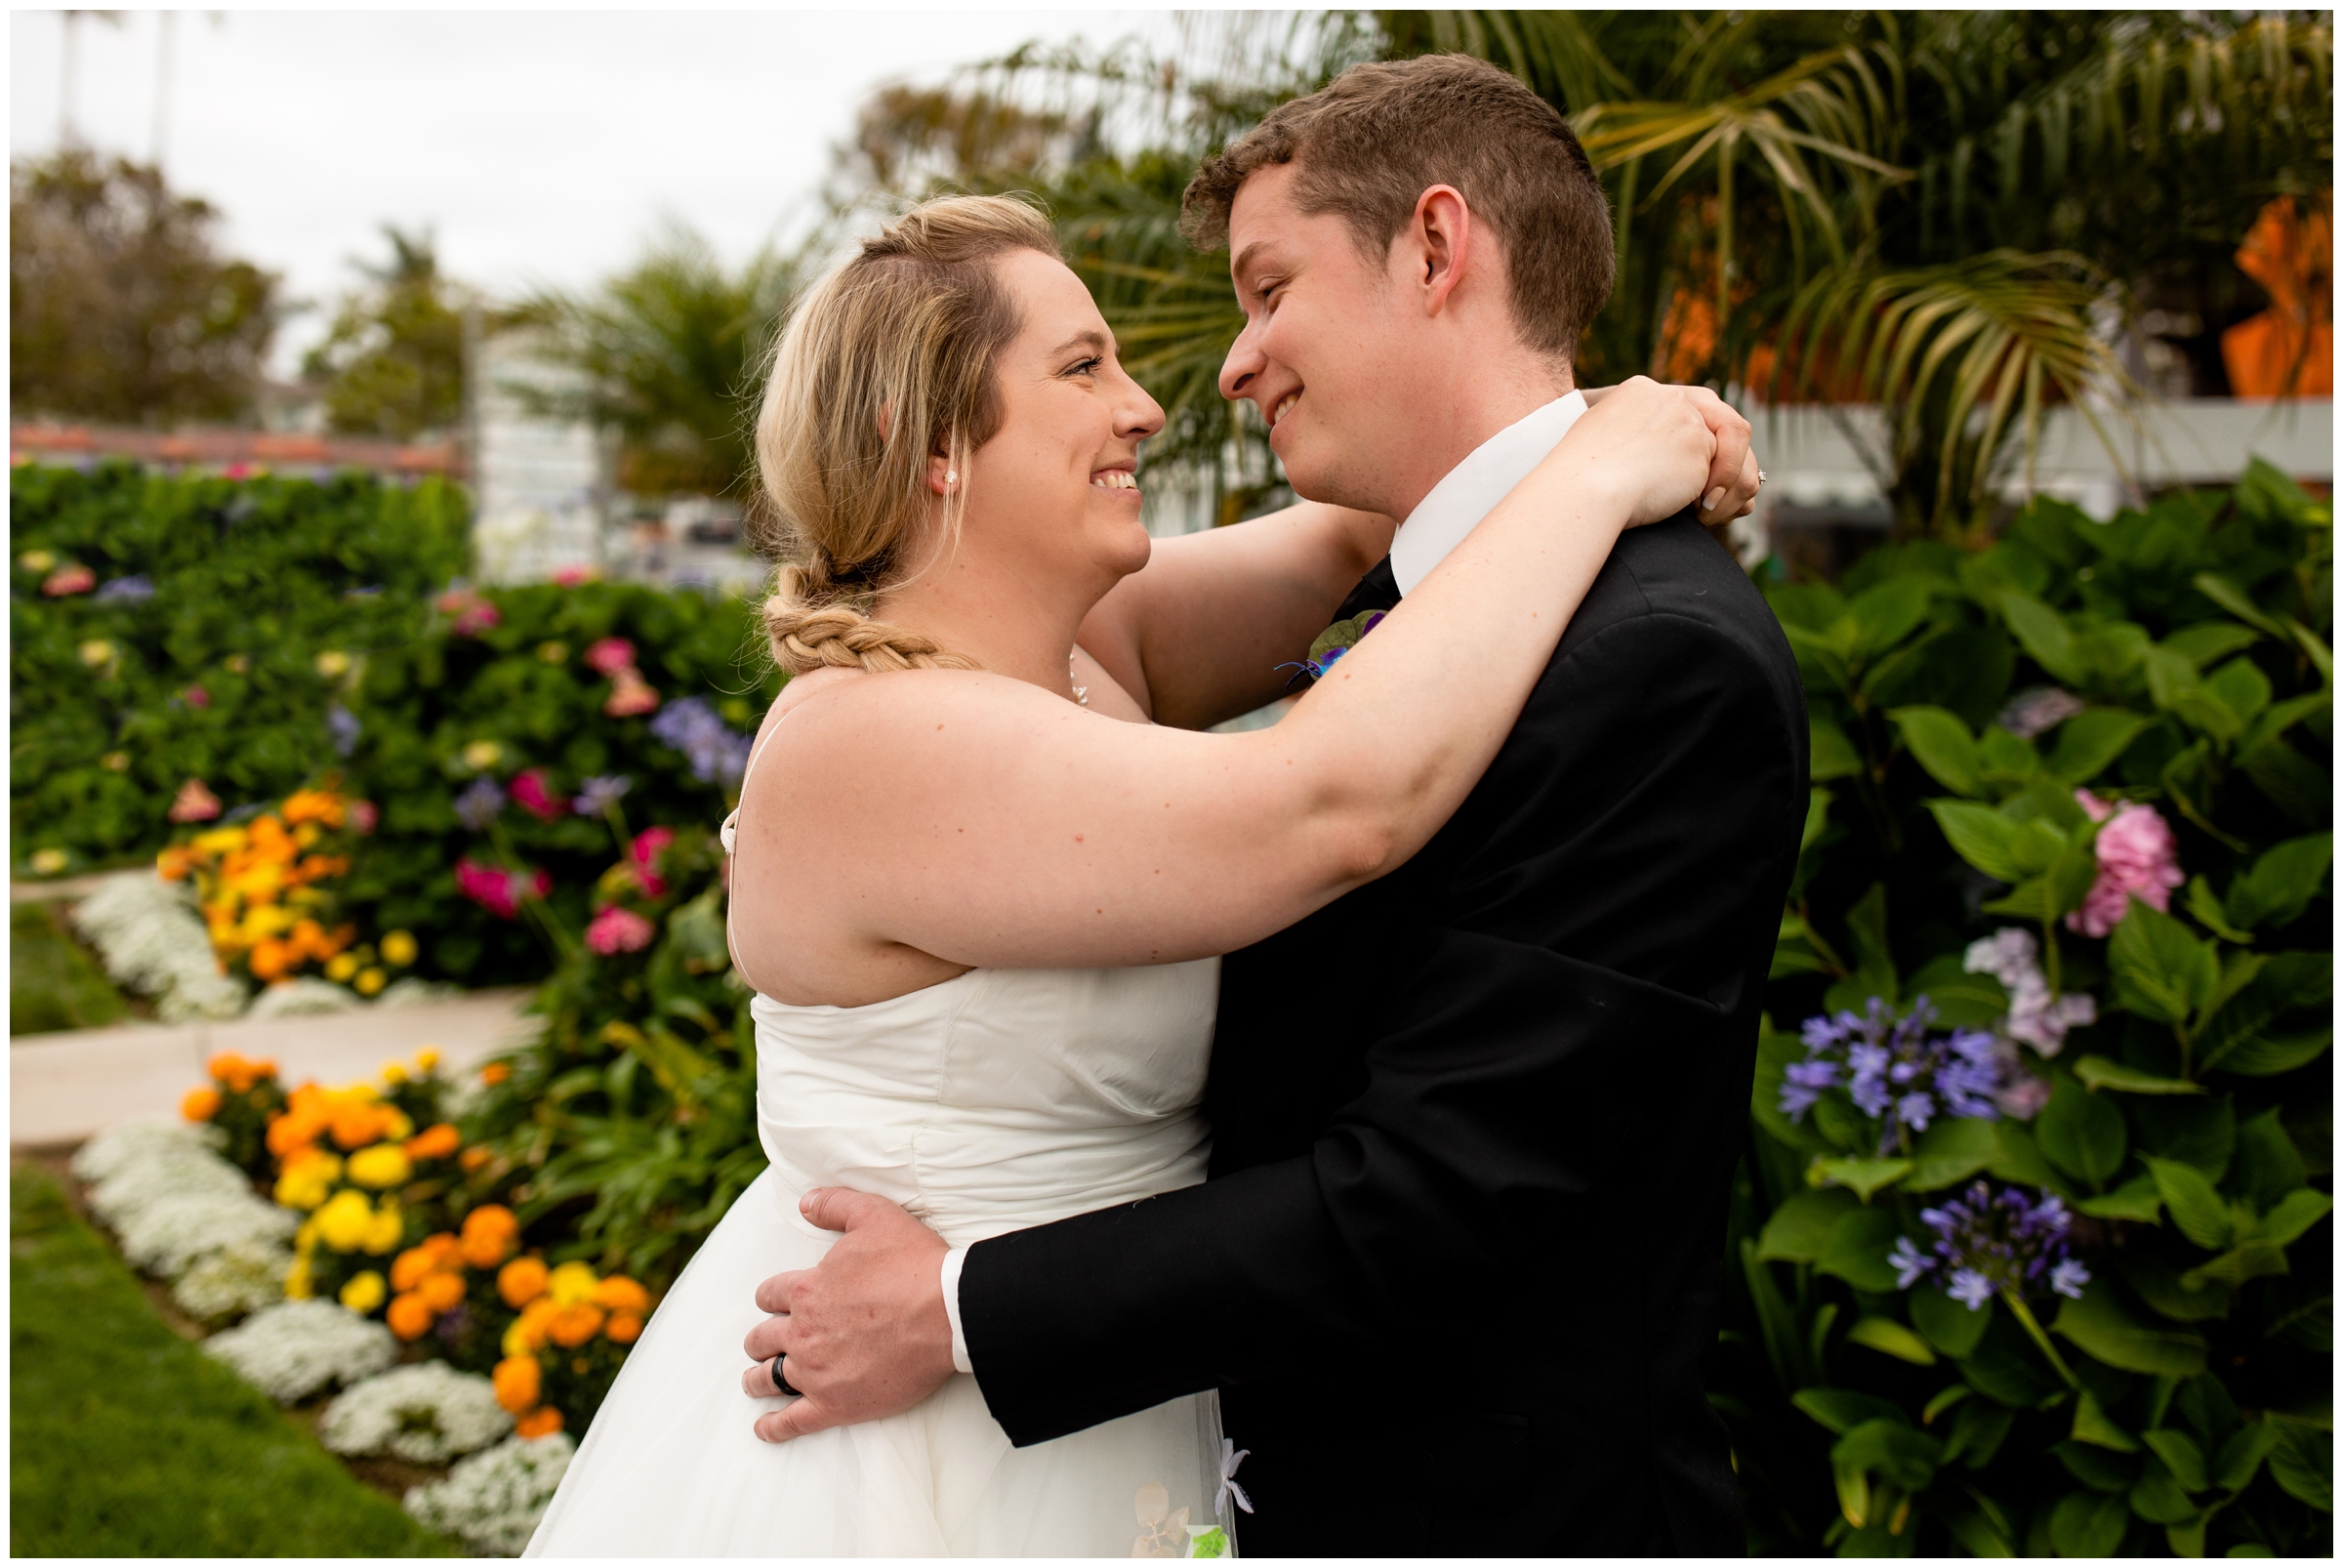 newlywed photo shoot in California by destination photographer Plum Pretty Photography 